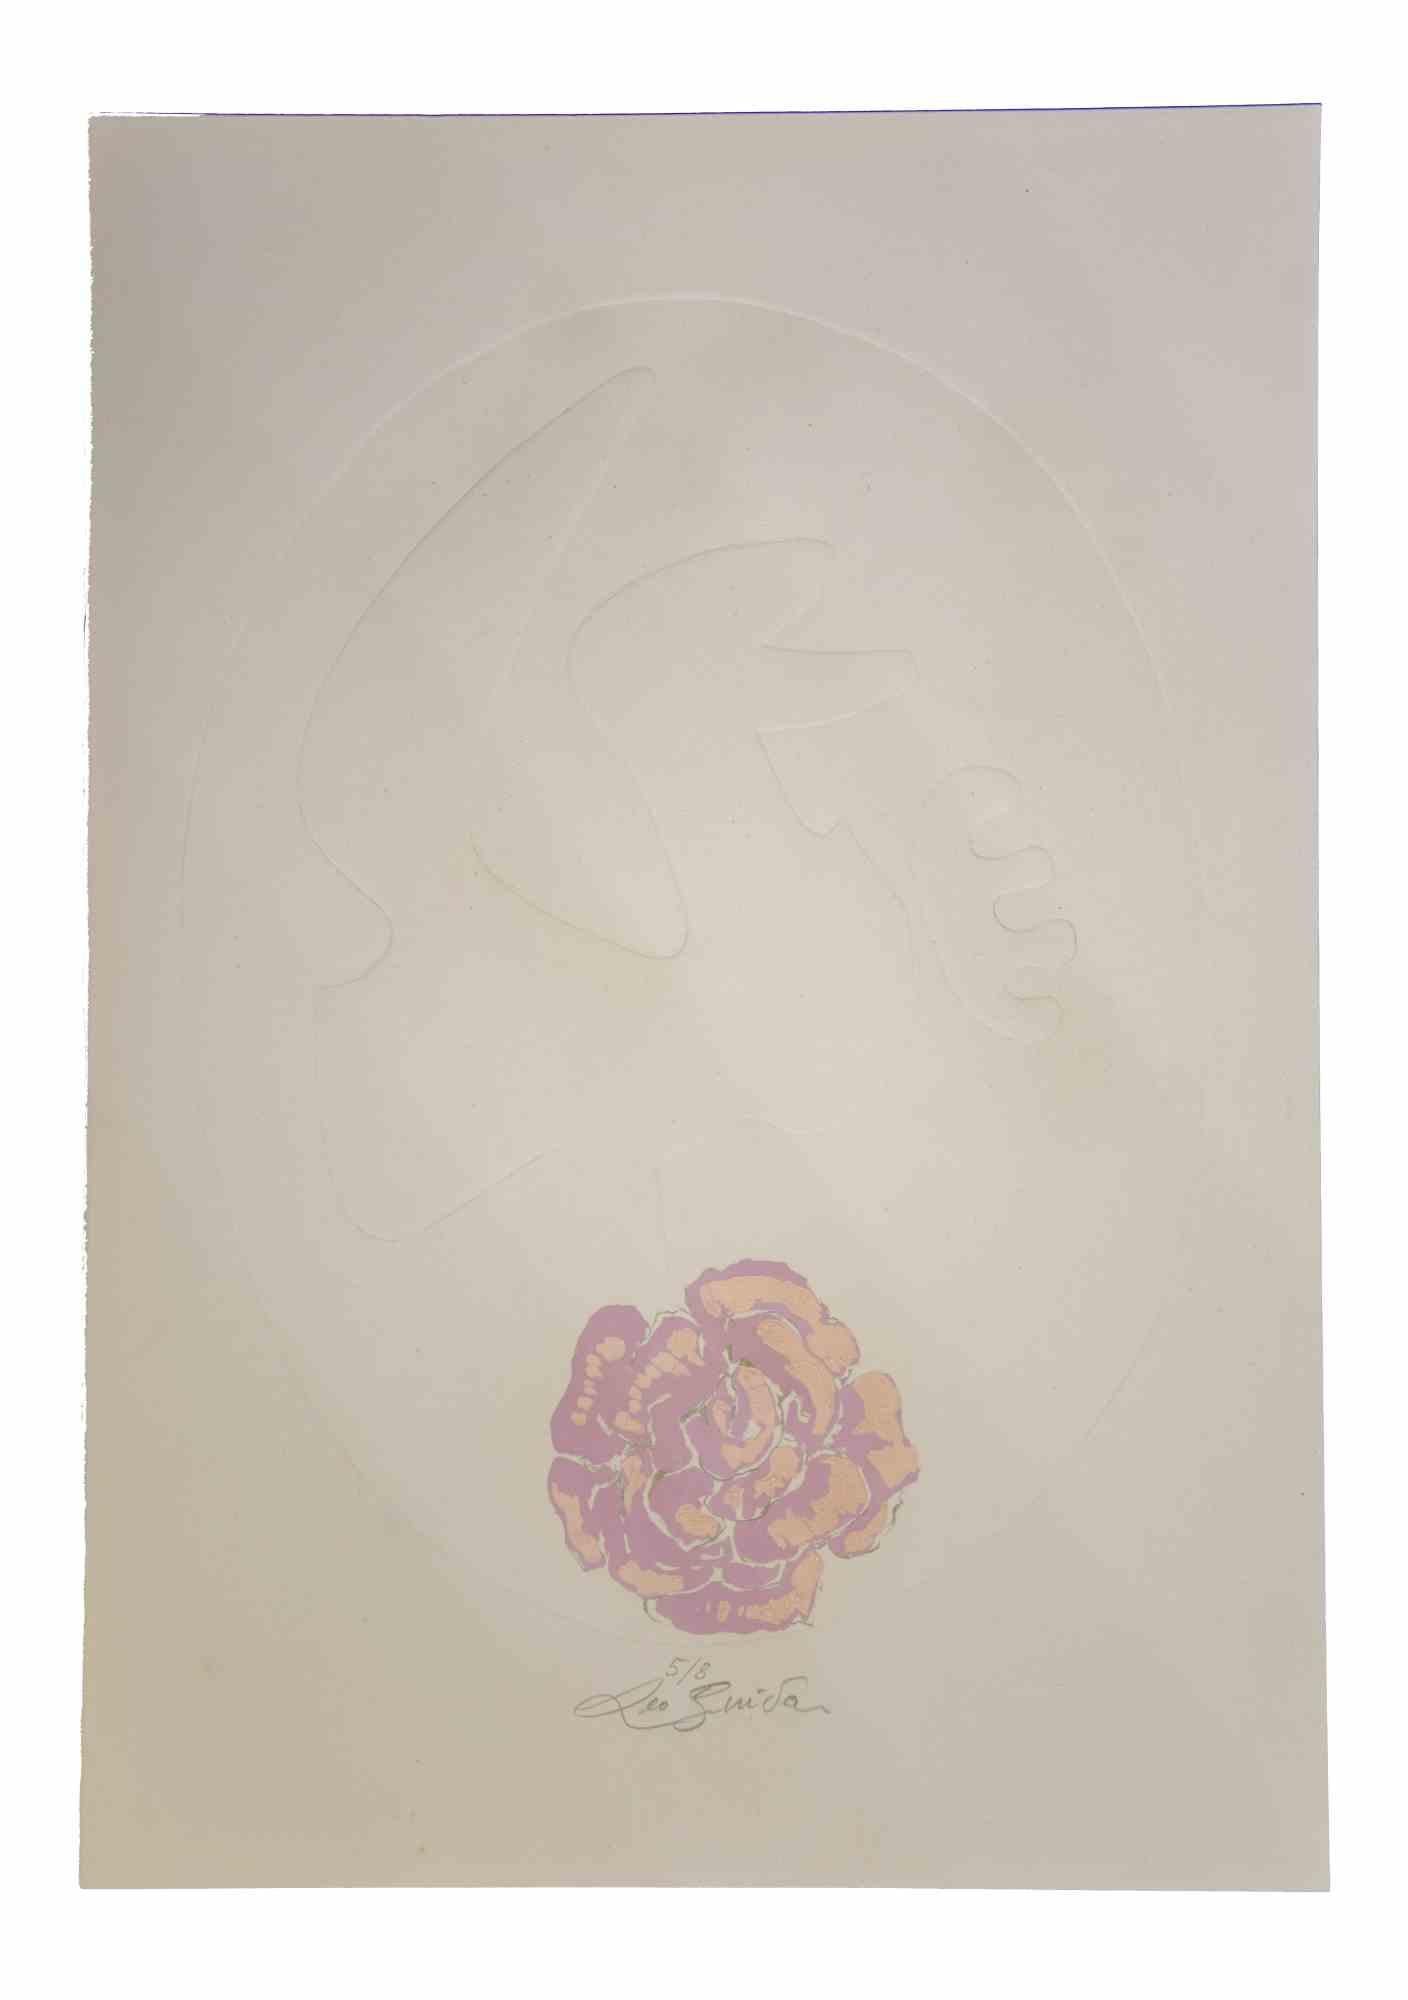 Composition is an original etching and embossing on paper realized by Leo Guida in 1980.

Good condition. Edition 5/8.

Hand signed lower center with pencil by the artist.

Leo Guida  (1992 - 2017). Sensitive to current issues, artistic movements